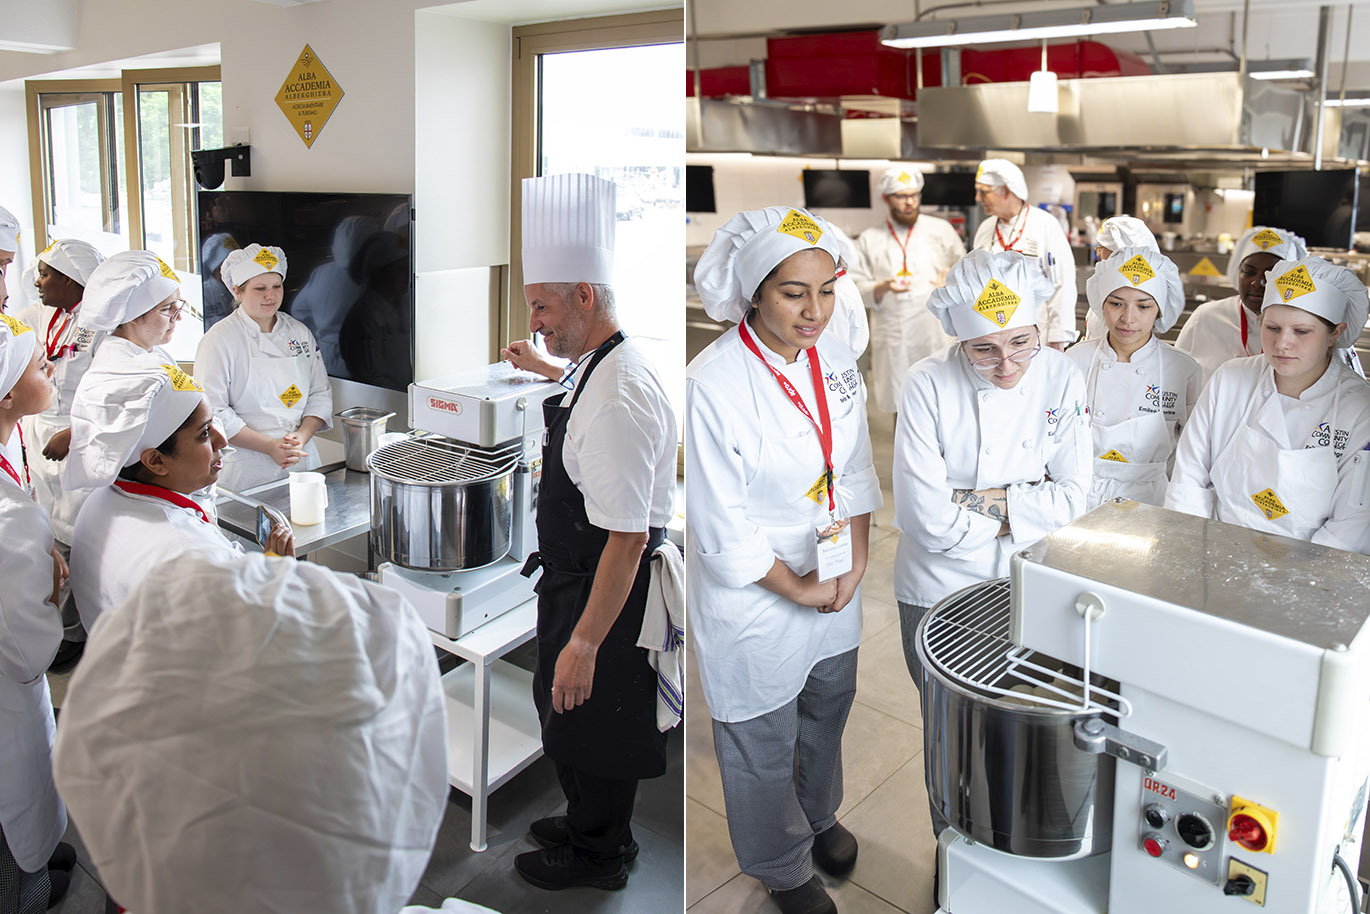 Two vertical images side-by-side showing students dressed in white culinary arts uniforms learning practical skills inside an instructional kitchen.